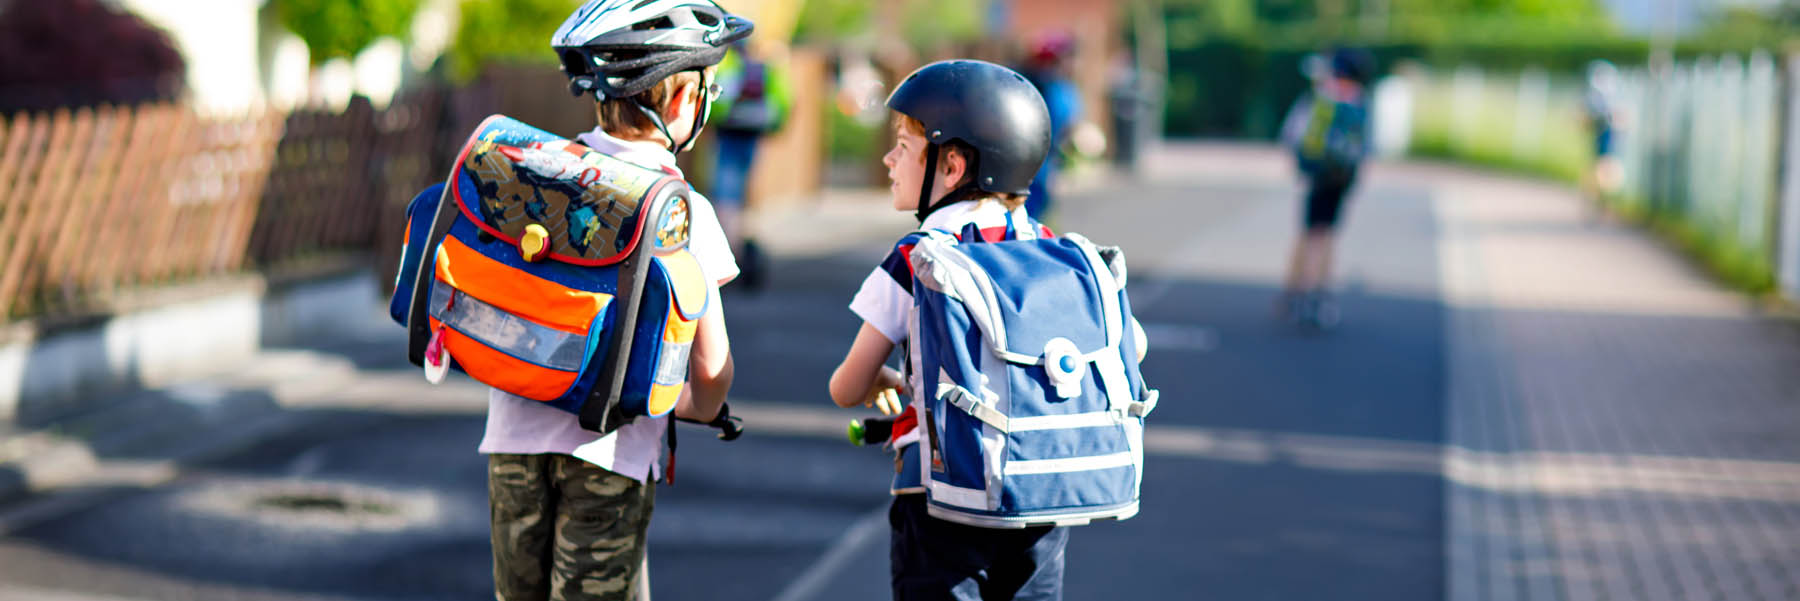 Two boys talk while riding scooters and wearing helmets and school backpacks